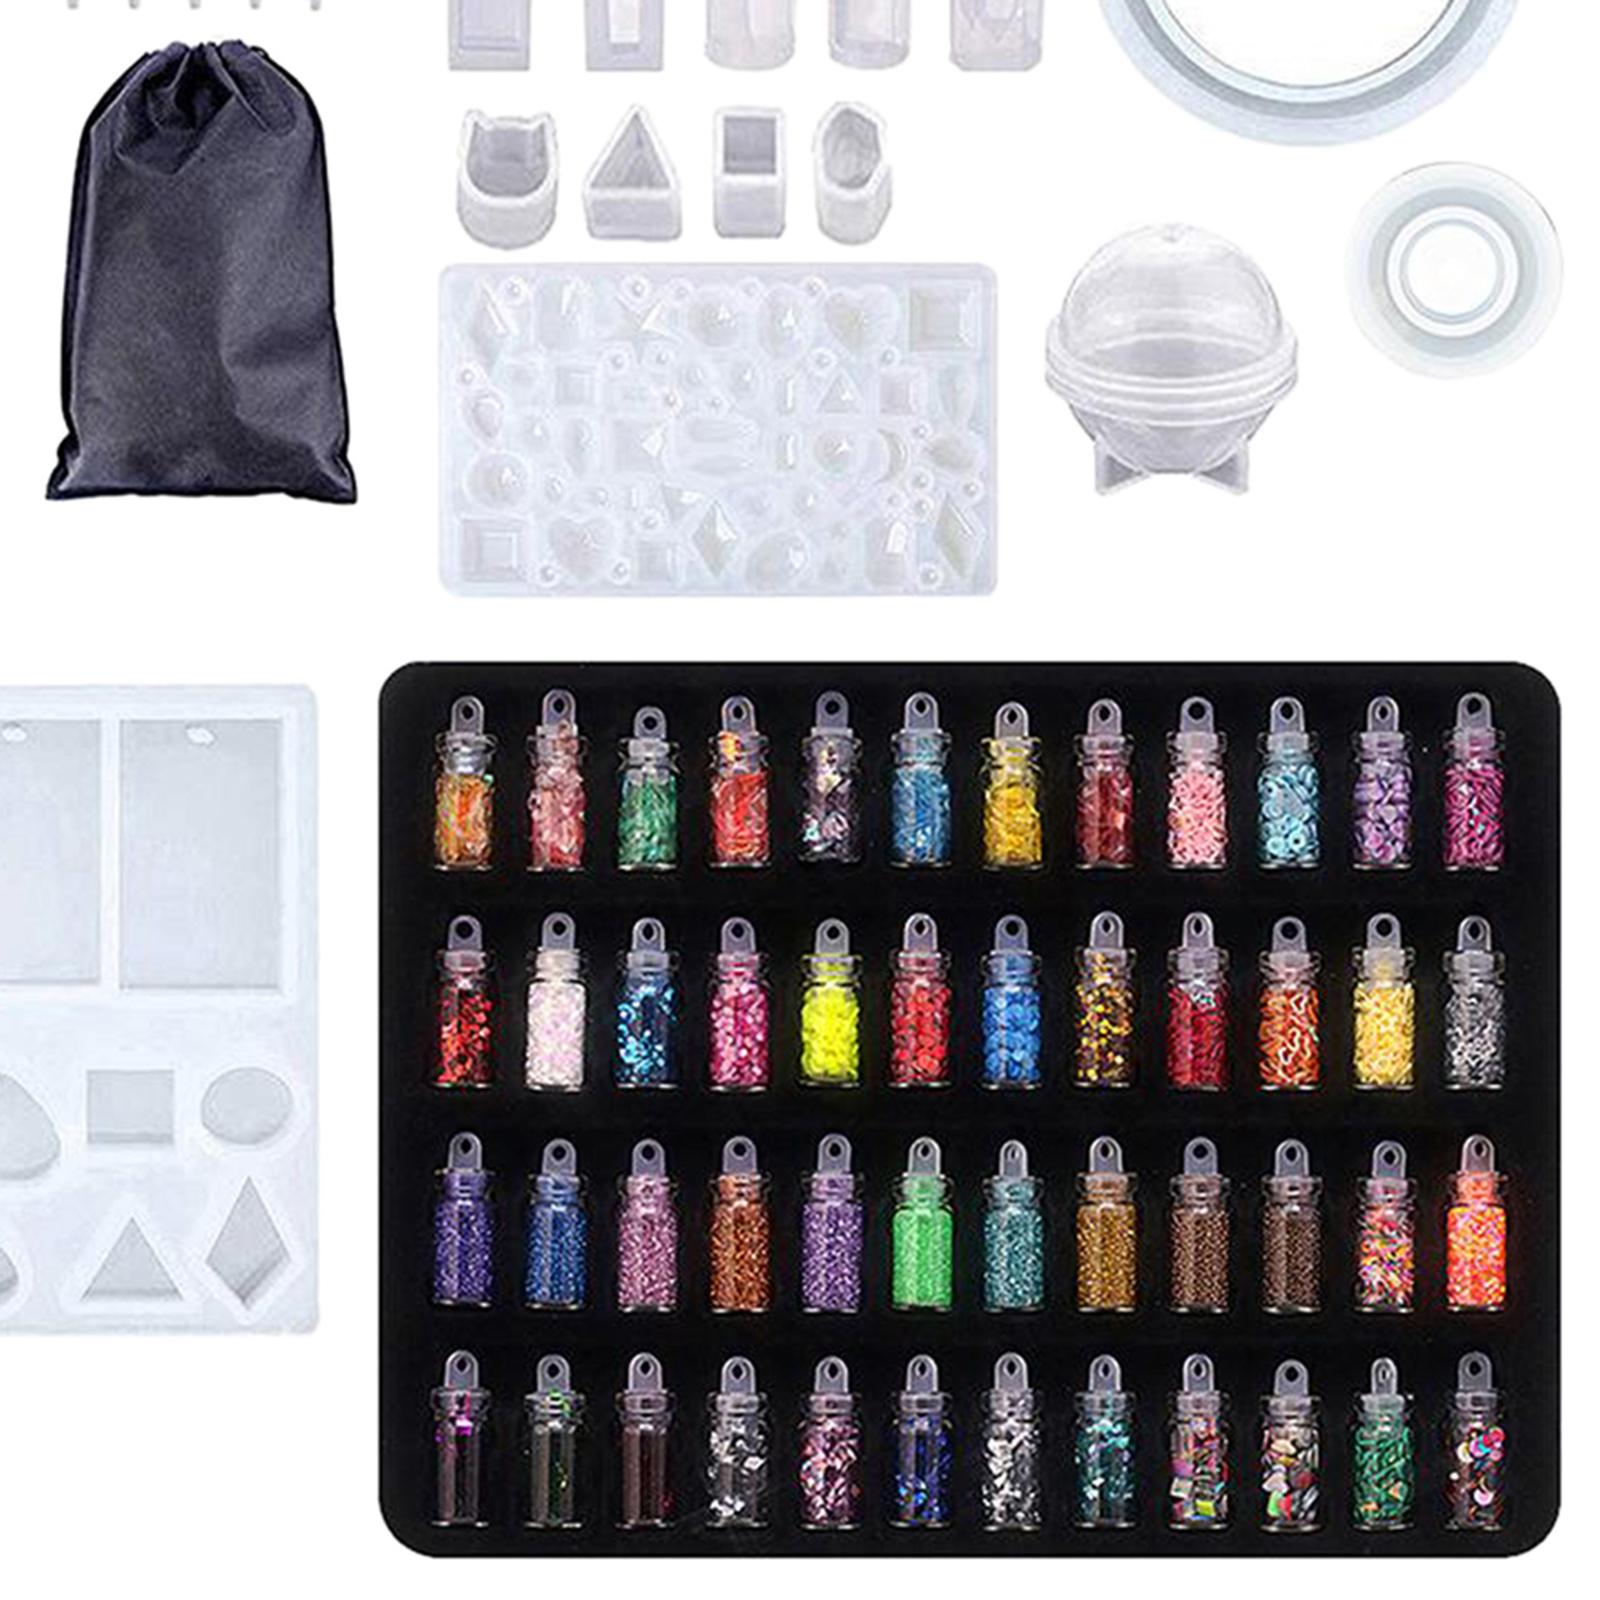 Resin Casting Silicone Mold Kit Jewelry Making Craft 184pcs(sequins)